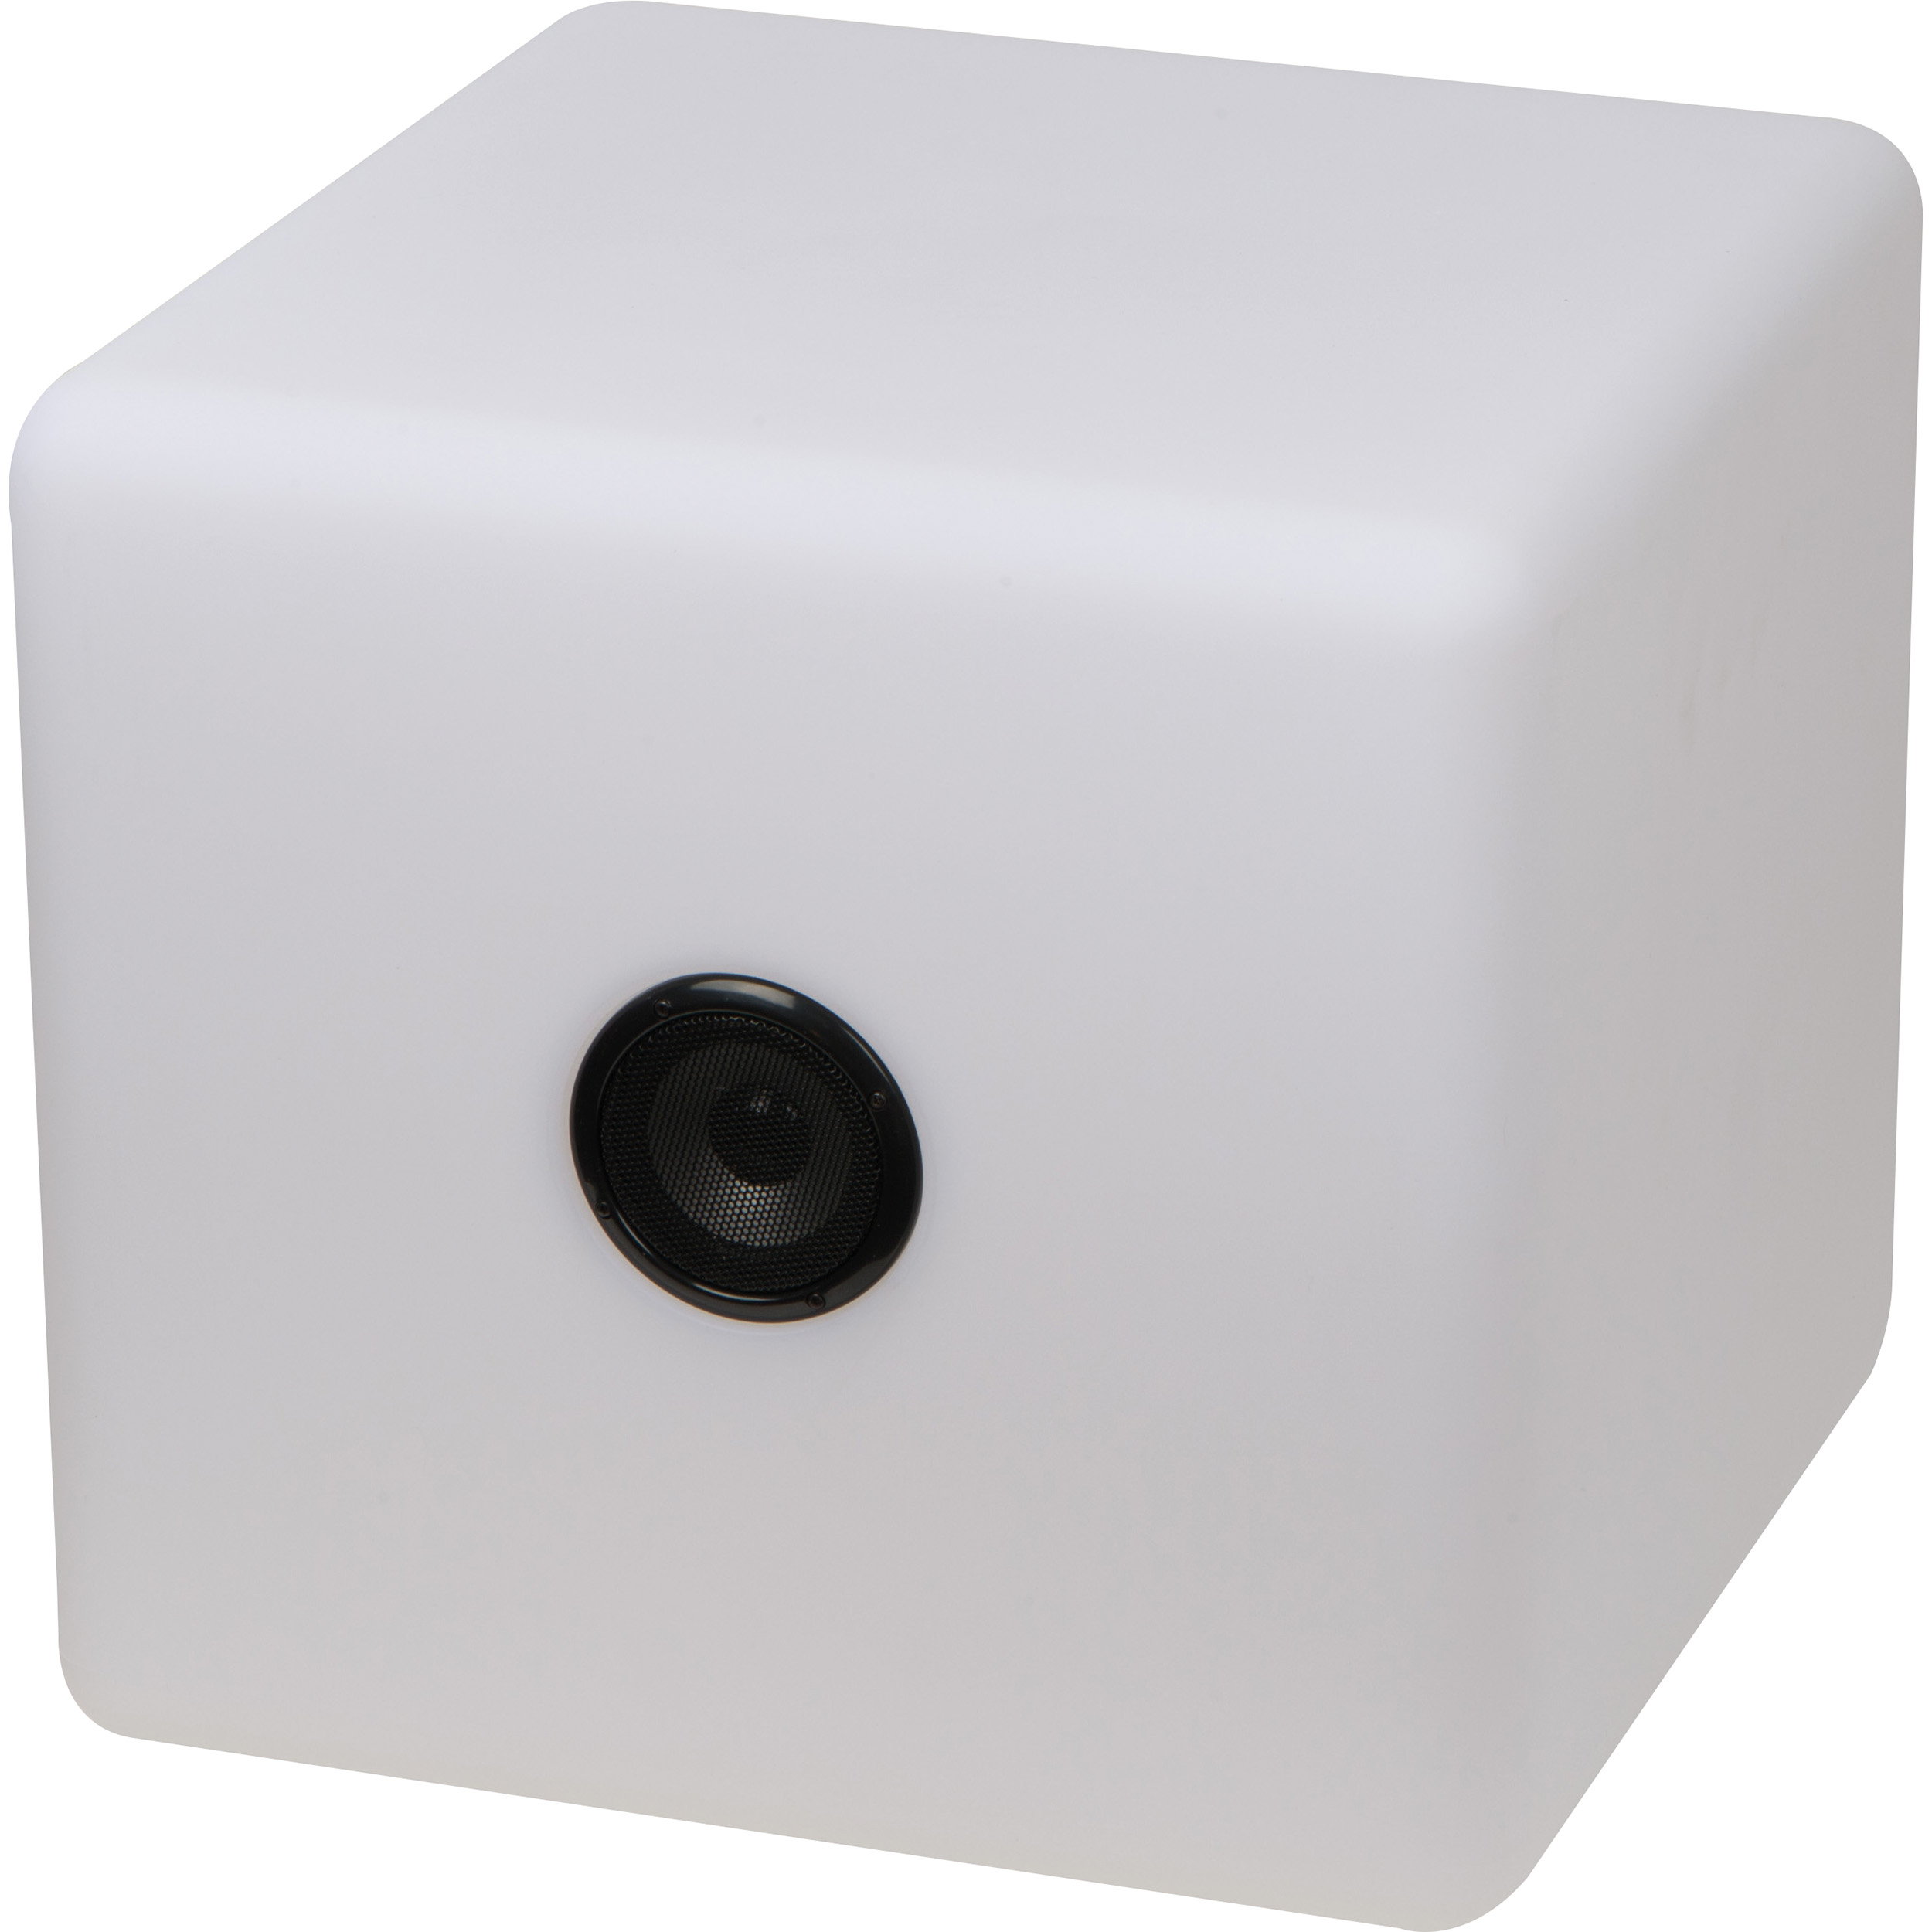 Coulour changing LED speaker